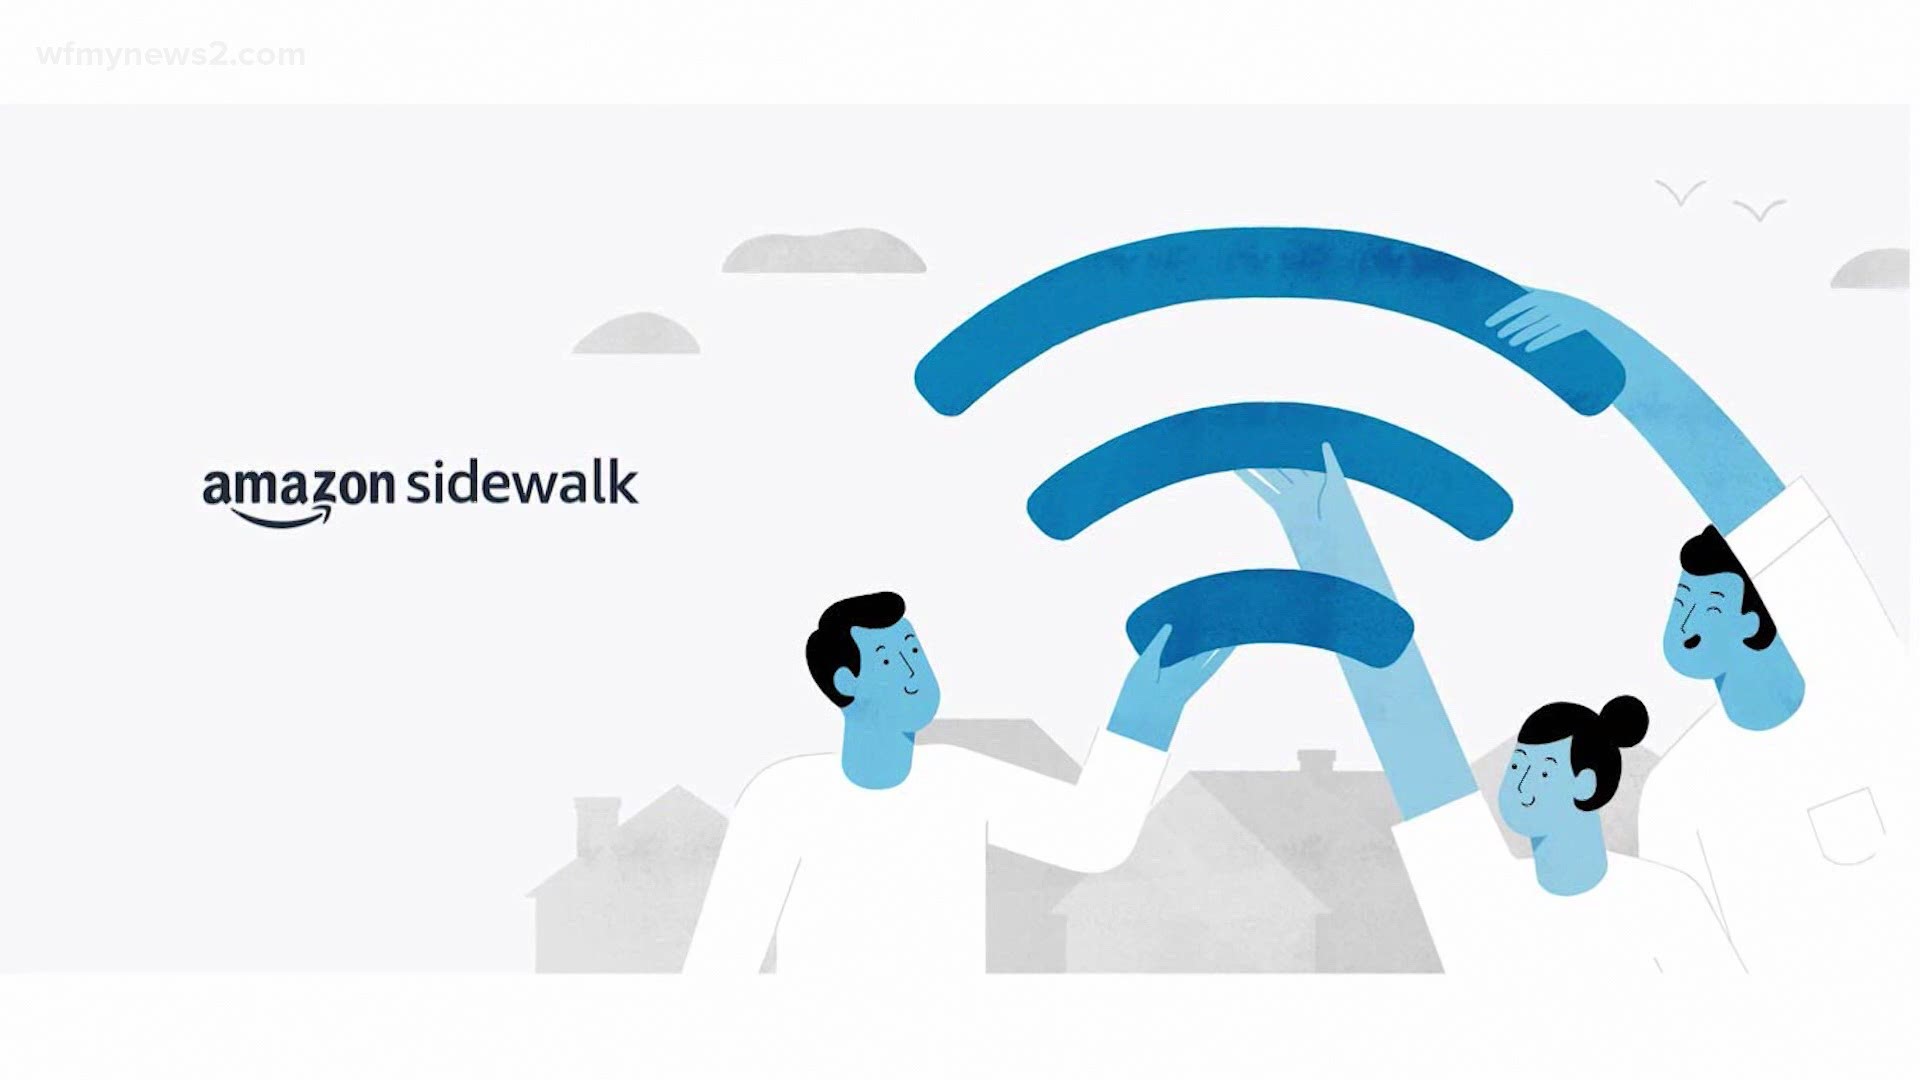 Sidewalk sends a small sliver of internet service from every home with an Amazon device to other homes in the area to boost spotty Wifi connection for the devices.